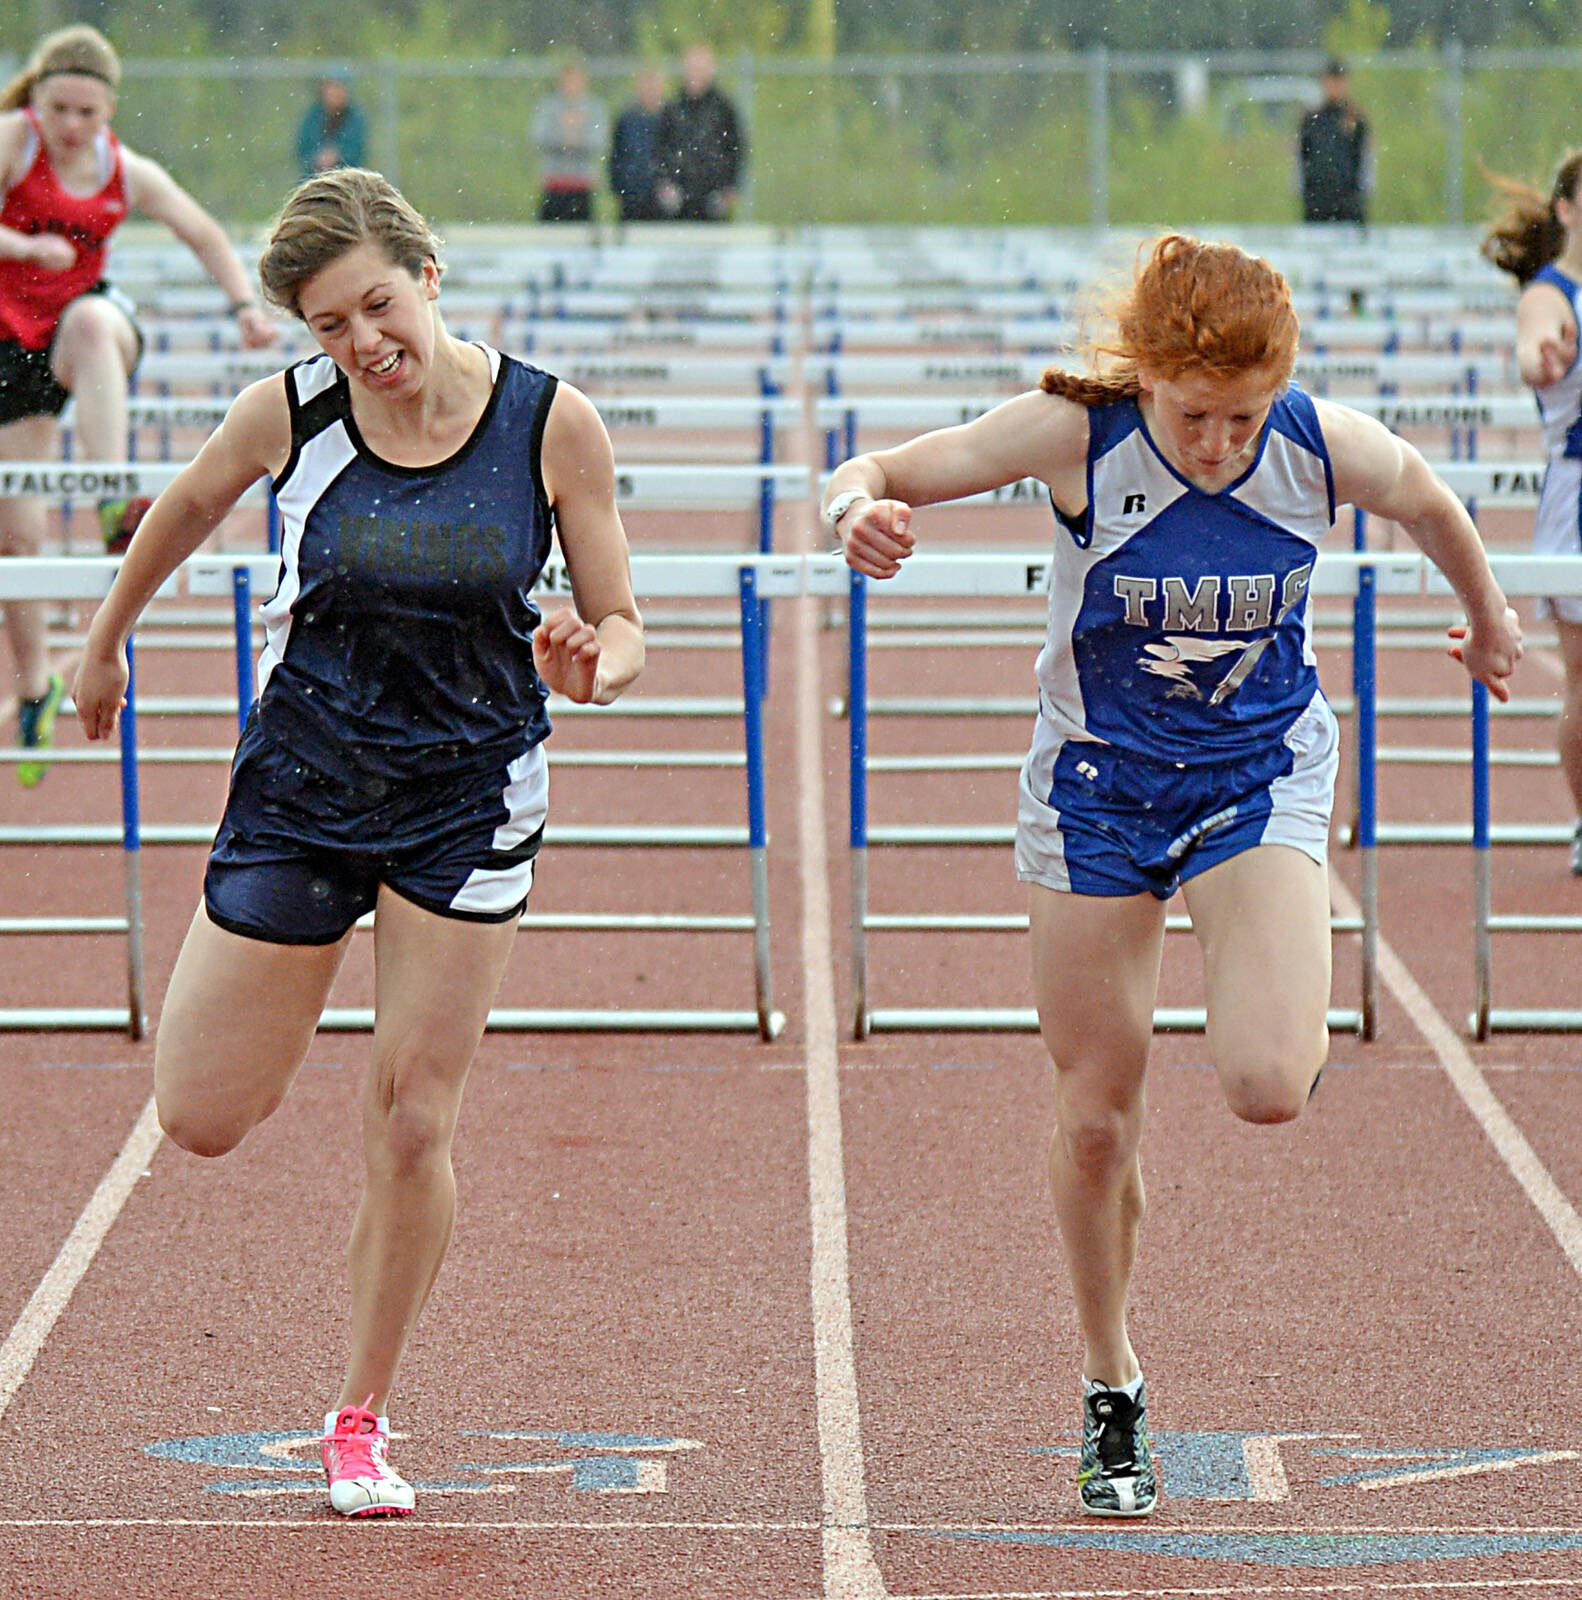 Petersburg High School sophomore Izabelle Ith, left, and Thunder Mountain junior Naomi Welling lean into the finish of the girls 100-meter hurdles finals at the 2015 Capital City Invitational. (Klas Stolpe / Juneau Empire)